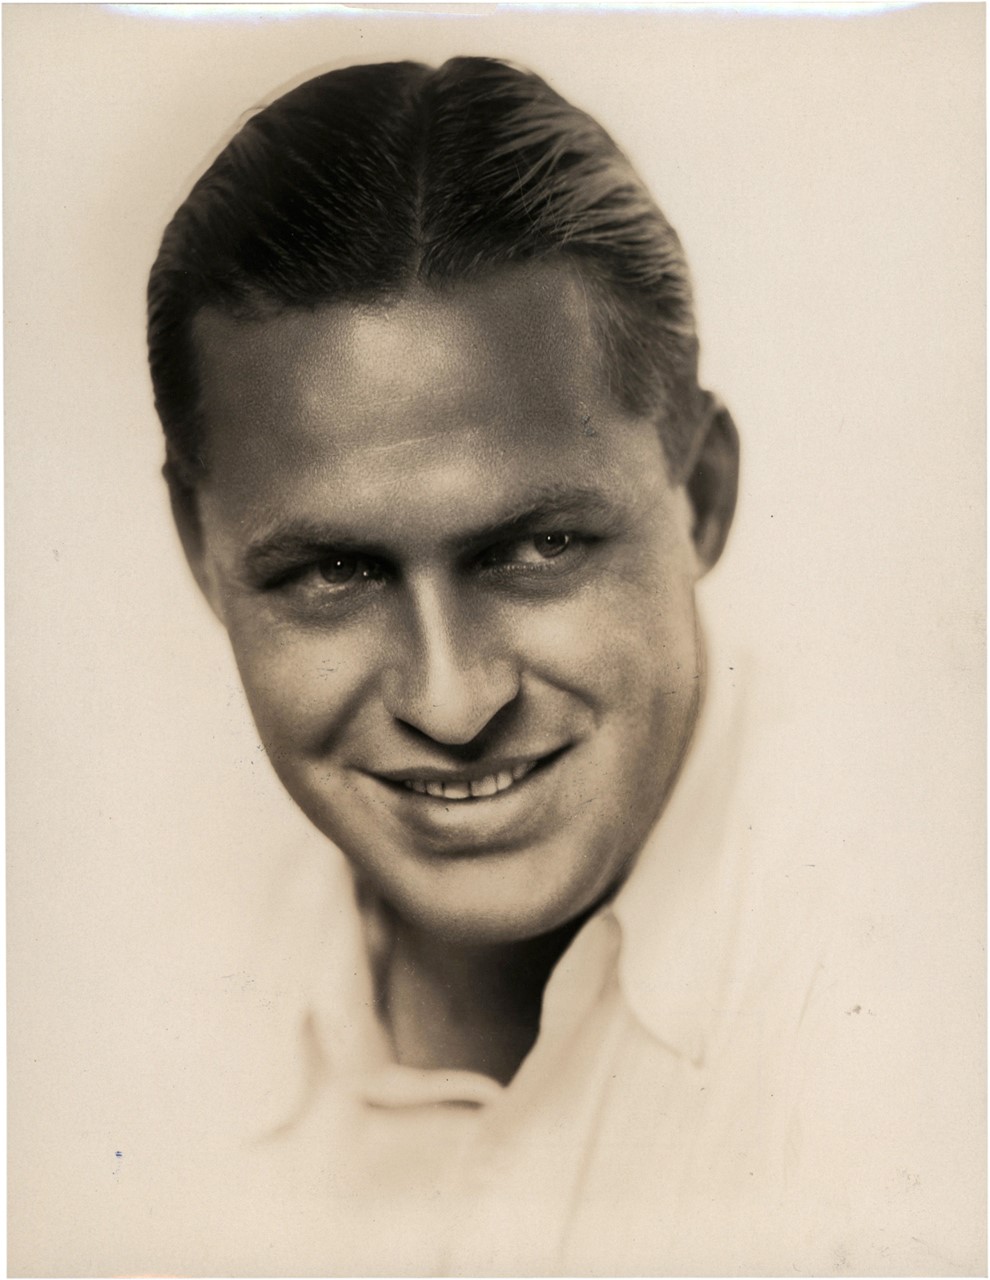 The Brown Brothers Collection - Bobby Jones Portrait Photograph (PSA Type I)